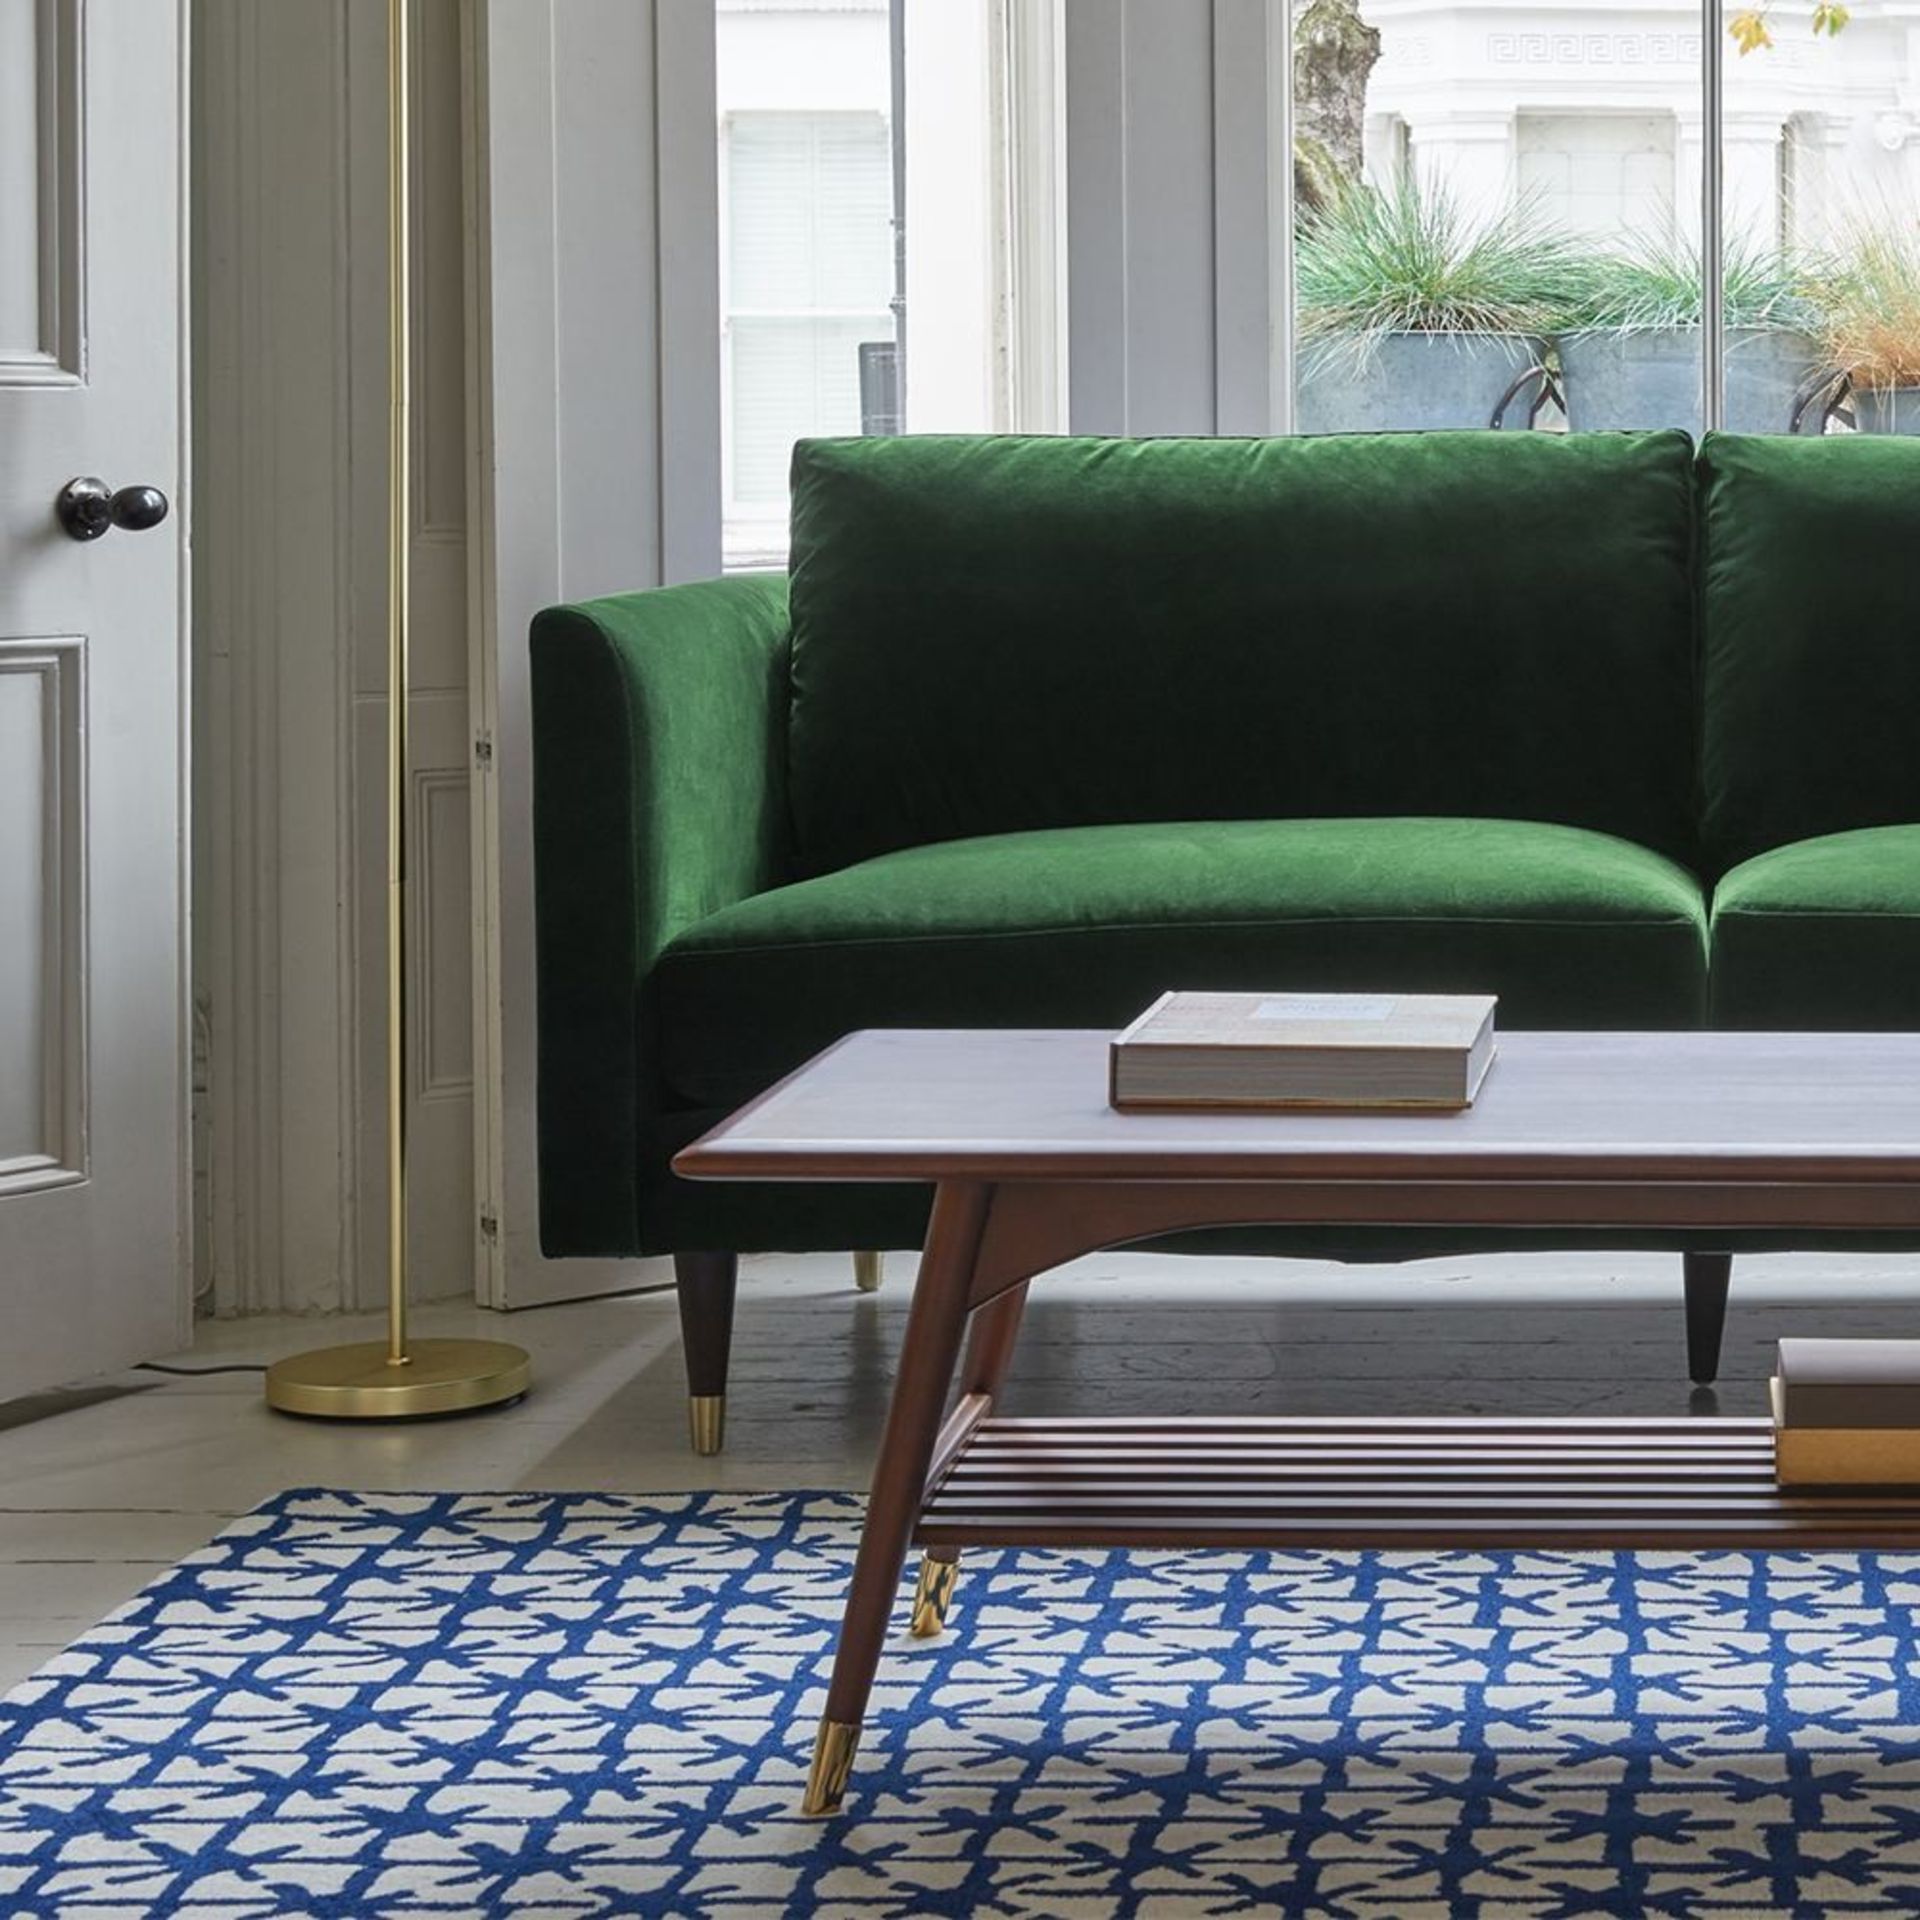 Henry 2 Seater Velvet Sofa - Emerald Green Henry By Christiane Lemieux Is A Contemporary Sofa With - Image 2 of 3